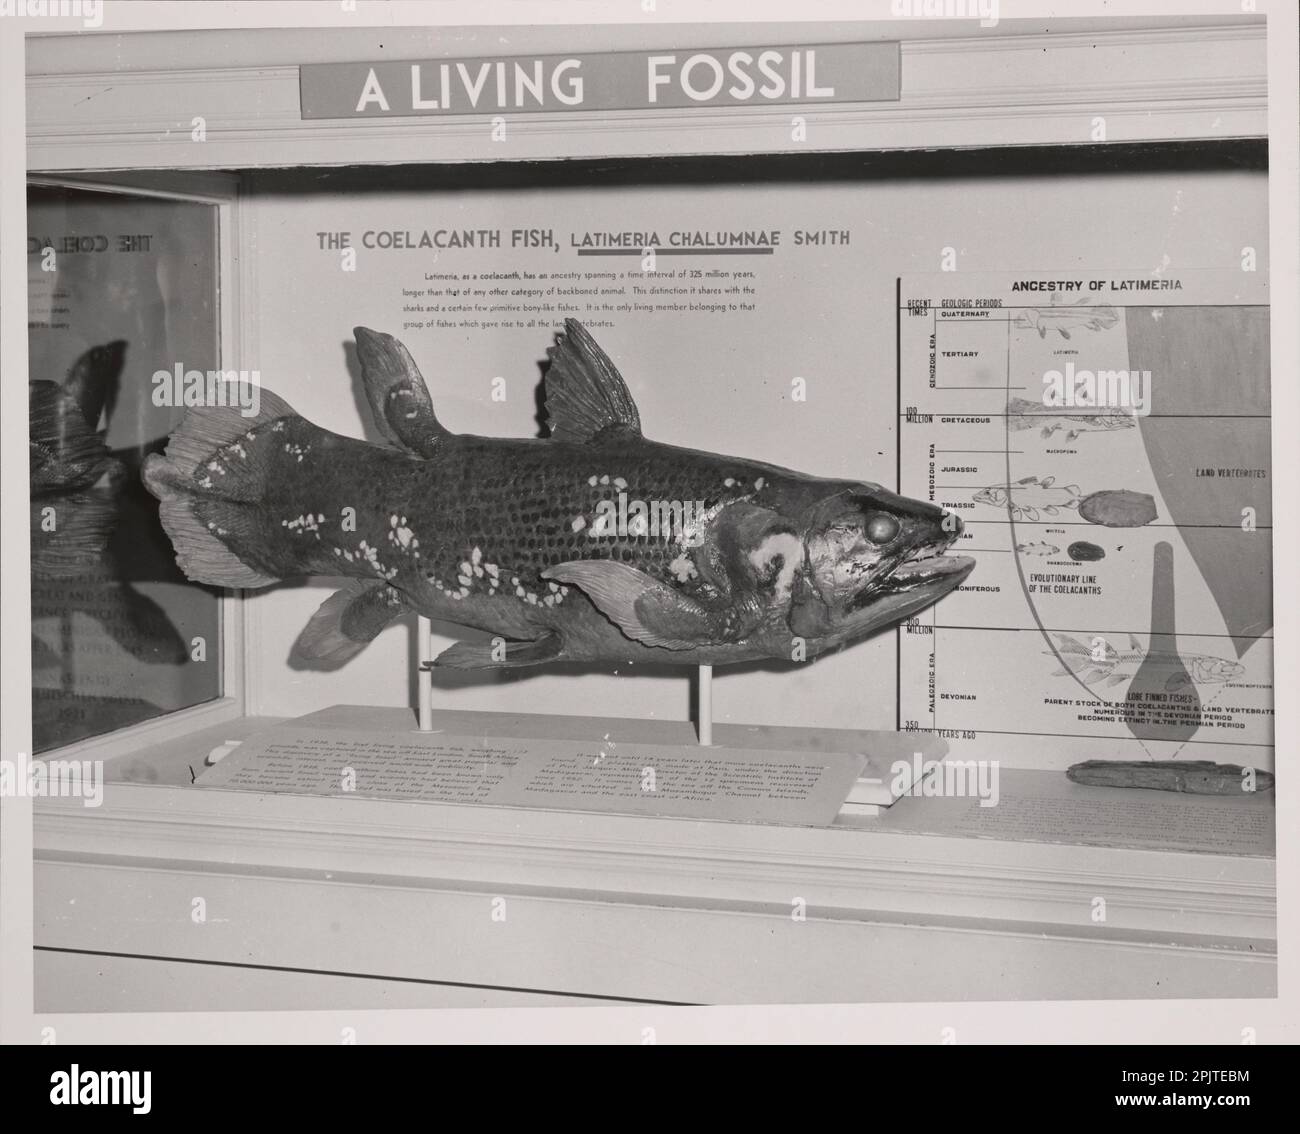 Male Coelacanth Fish living fossil display, Museum of Natural History, Washington, DC, USA Stock Photo